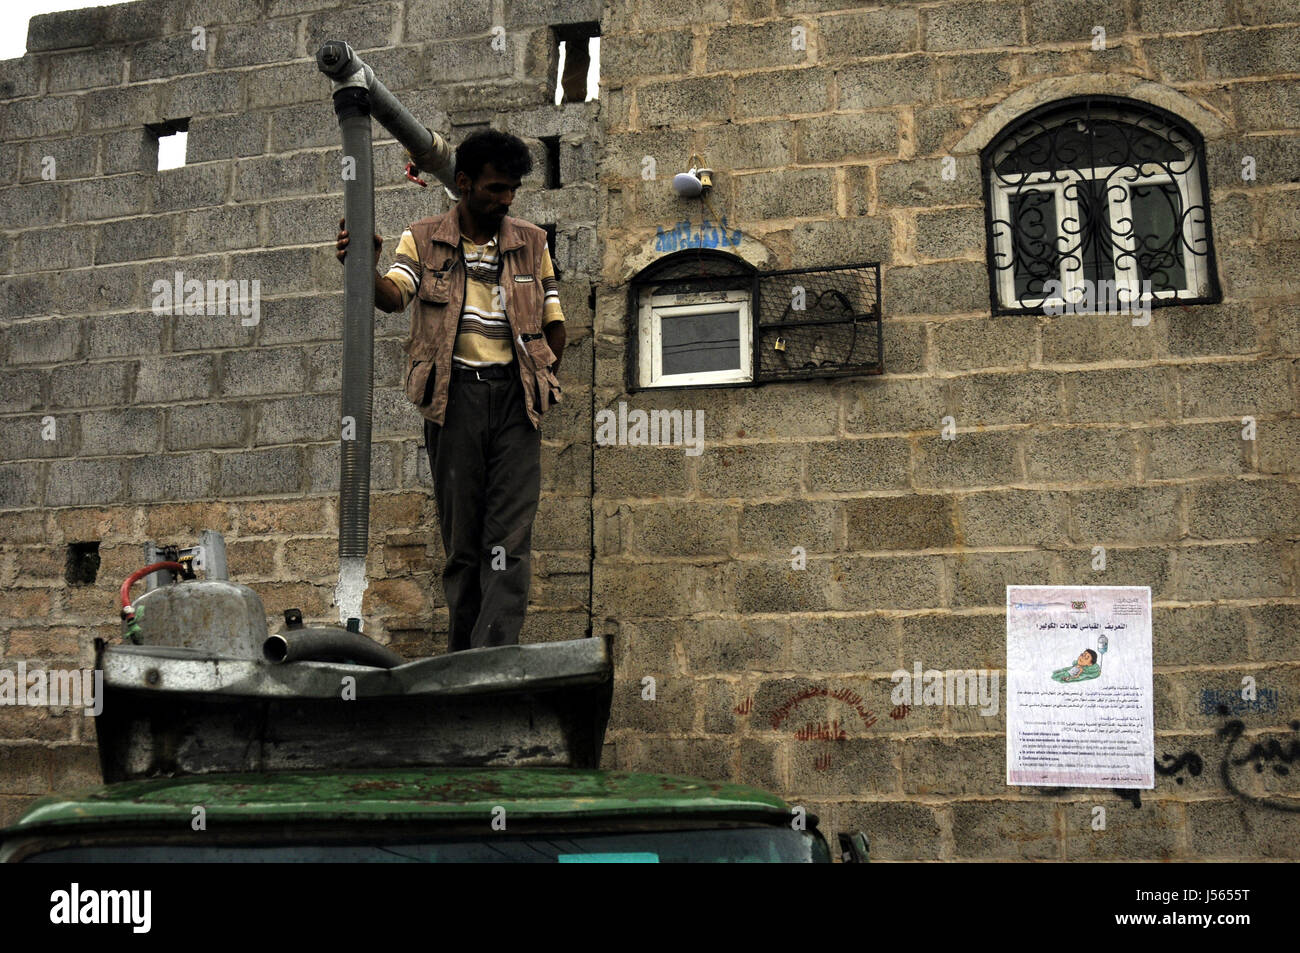 Sanaa, Yemen. 16th May, 2017. A man fills his water tanker with clean water from a charity water pump in Sanaa, Yemen on May 16, 2017. Contaminated water is a reason causing the cholera disease in Yemen. Credit: Mohammed Mohammed/Xinhua/Alamy Live News Stock Photo